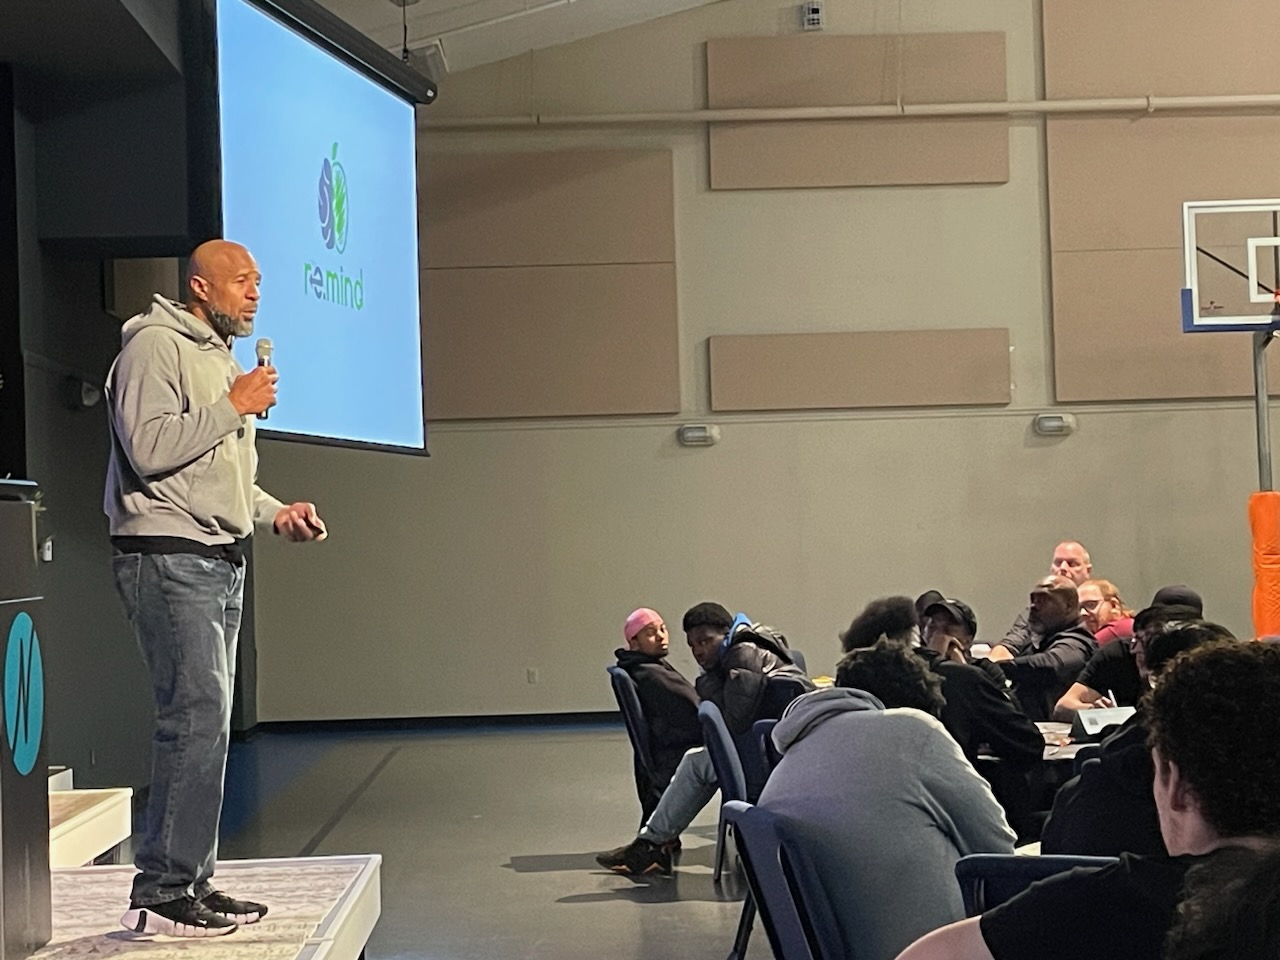 This is a photo showing NFL legend Dorsey Levens speaking to a group of SCSD high school students, who are all seated around tables watching him speak.